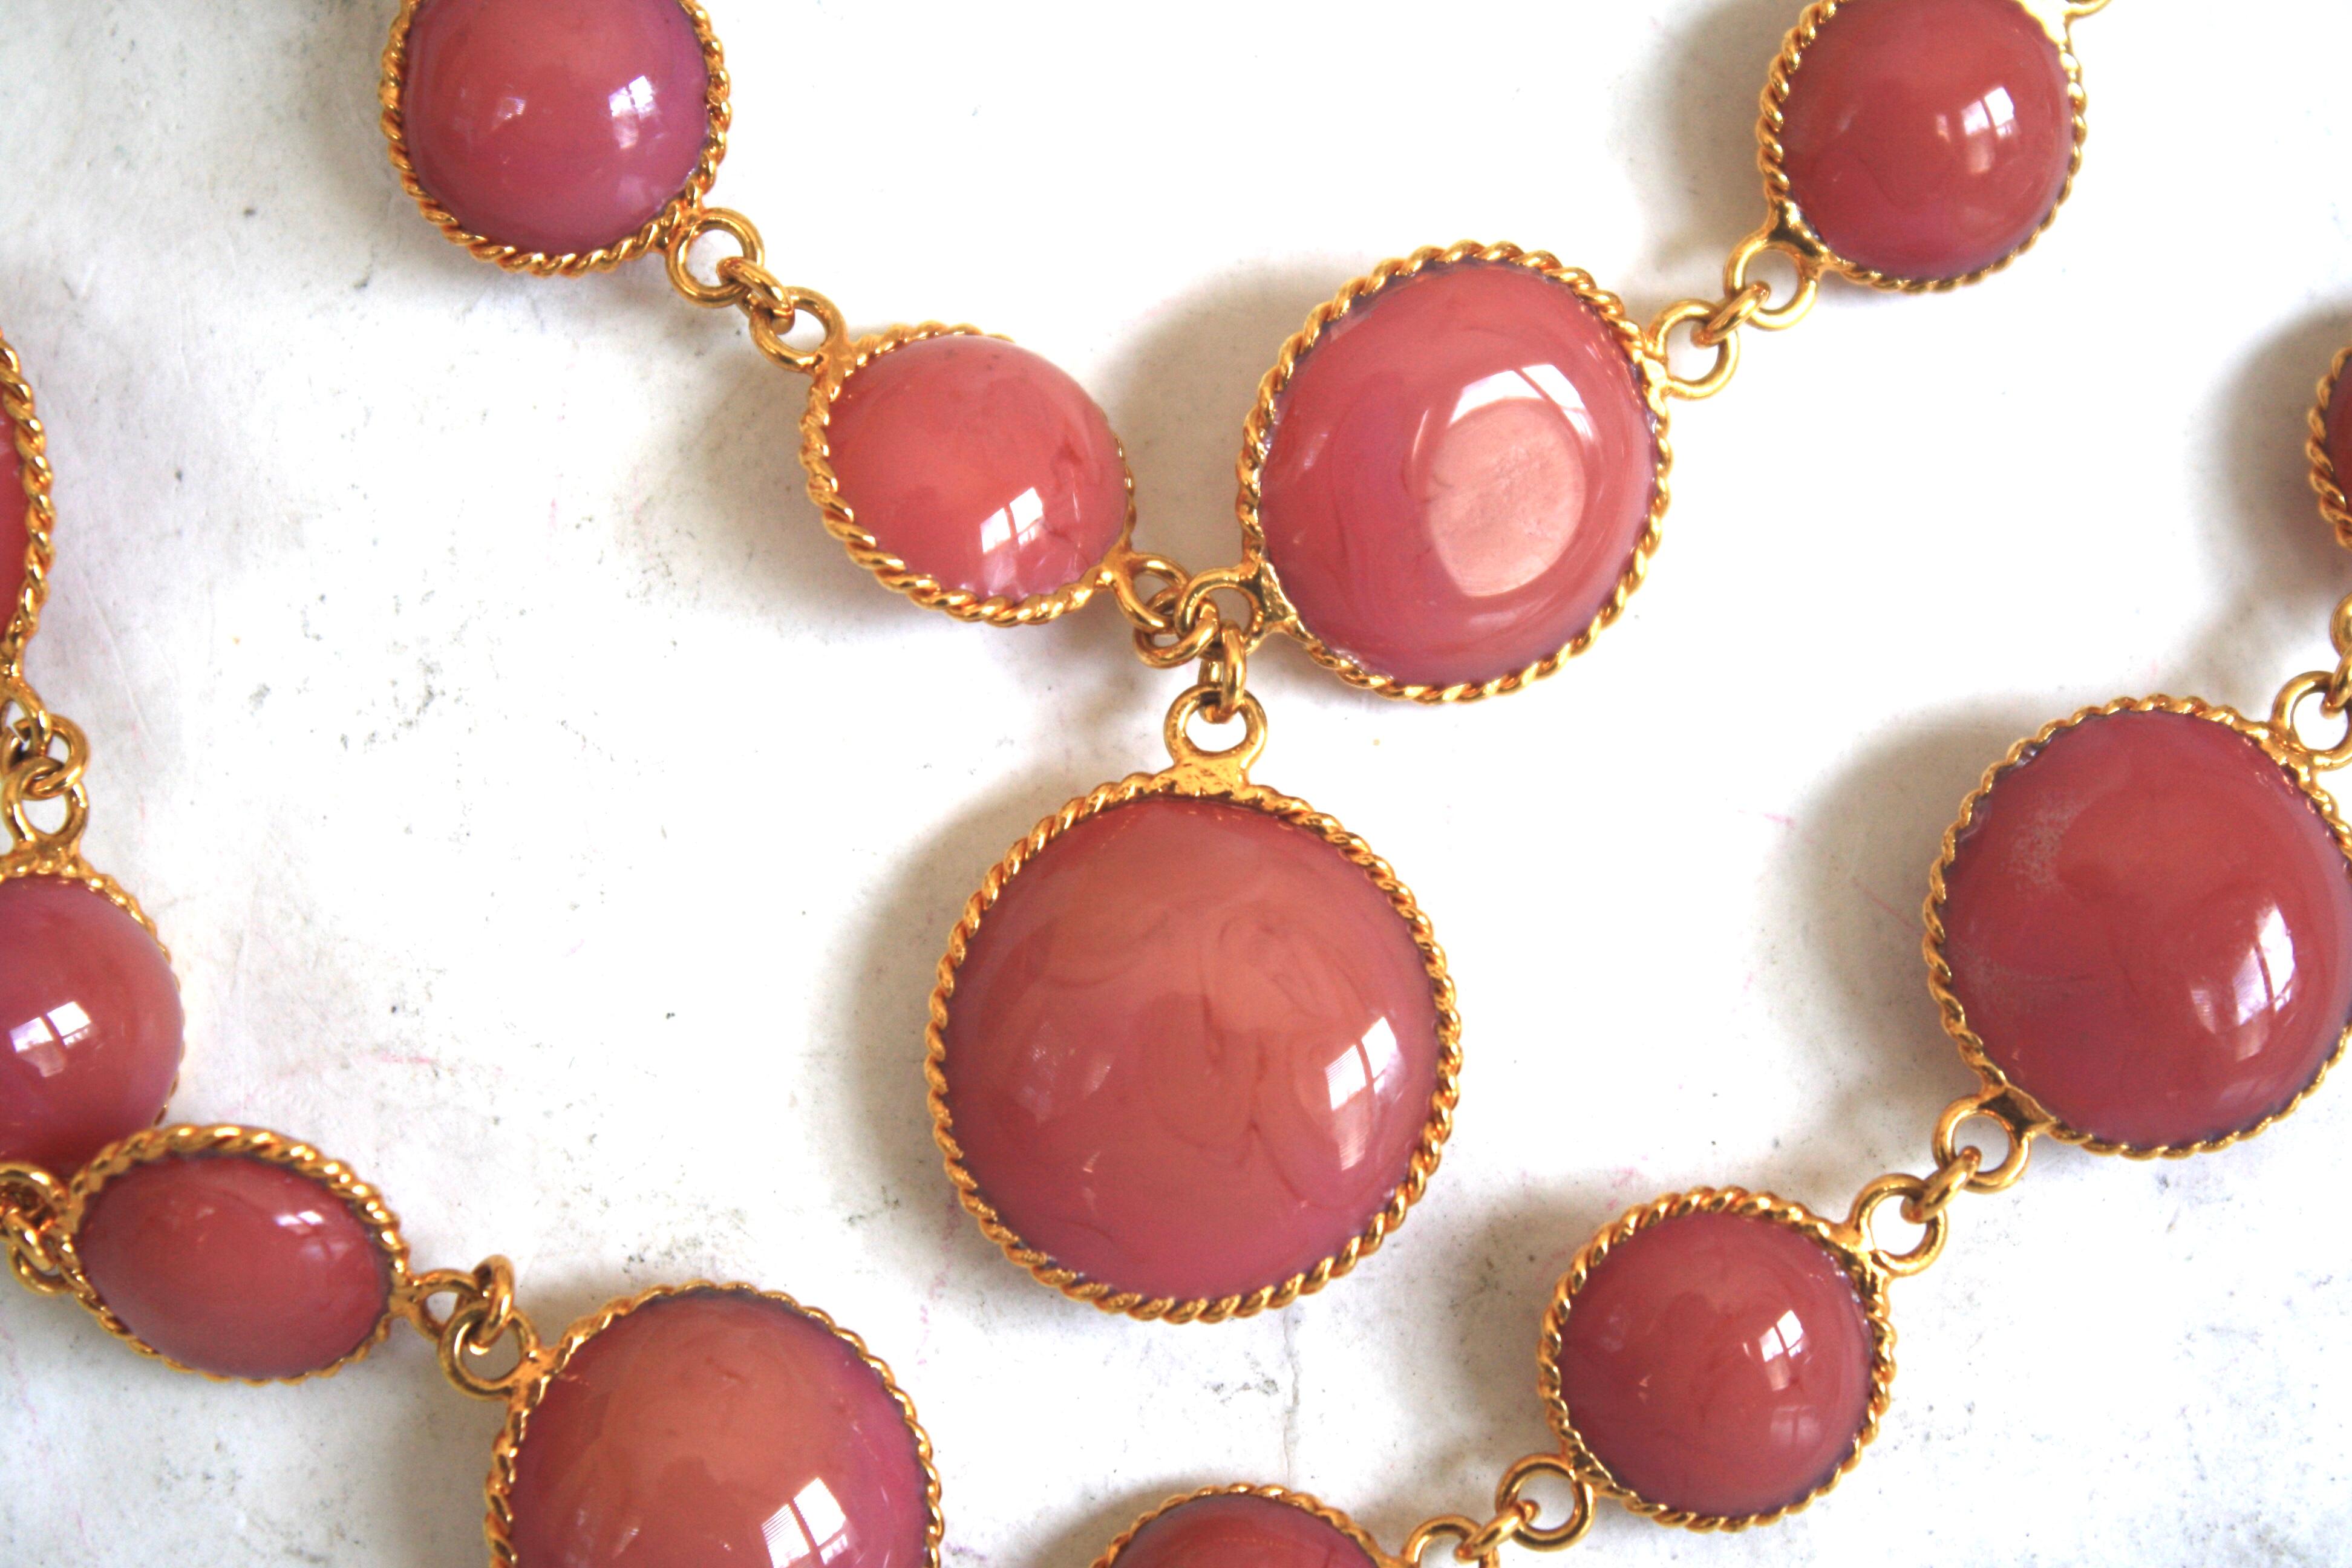 Rosey Mauve pate de verre glass necklace made by the former artisans who worked for Maison Gripoix. 